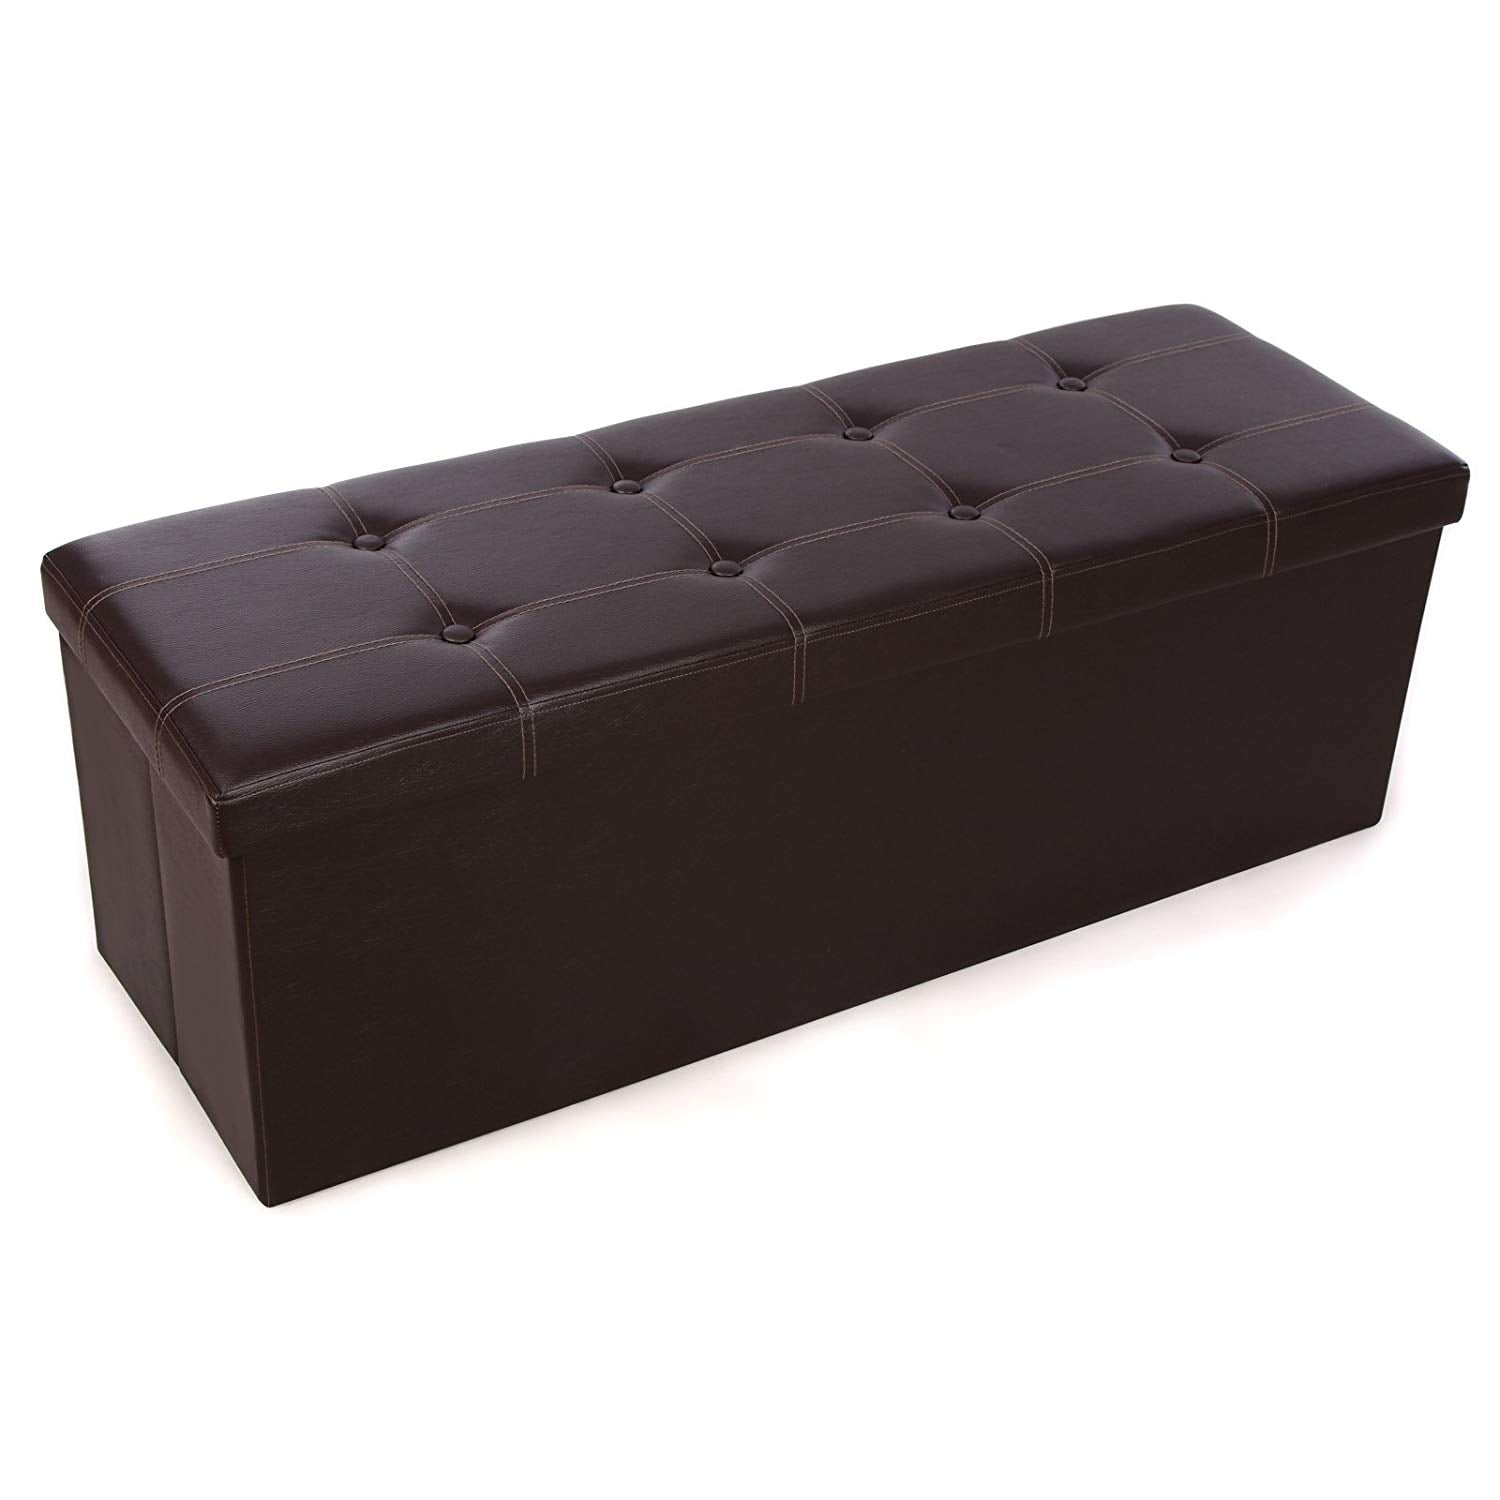 REDCAMP 38 x 38 x 38 cm Folding Ottoman Seat Storage Box Faux Leather Footstool and Pouffes Foot Rest Stool for Kids Toys Bedroom Living Room 55L Brown